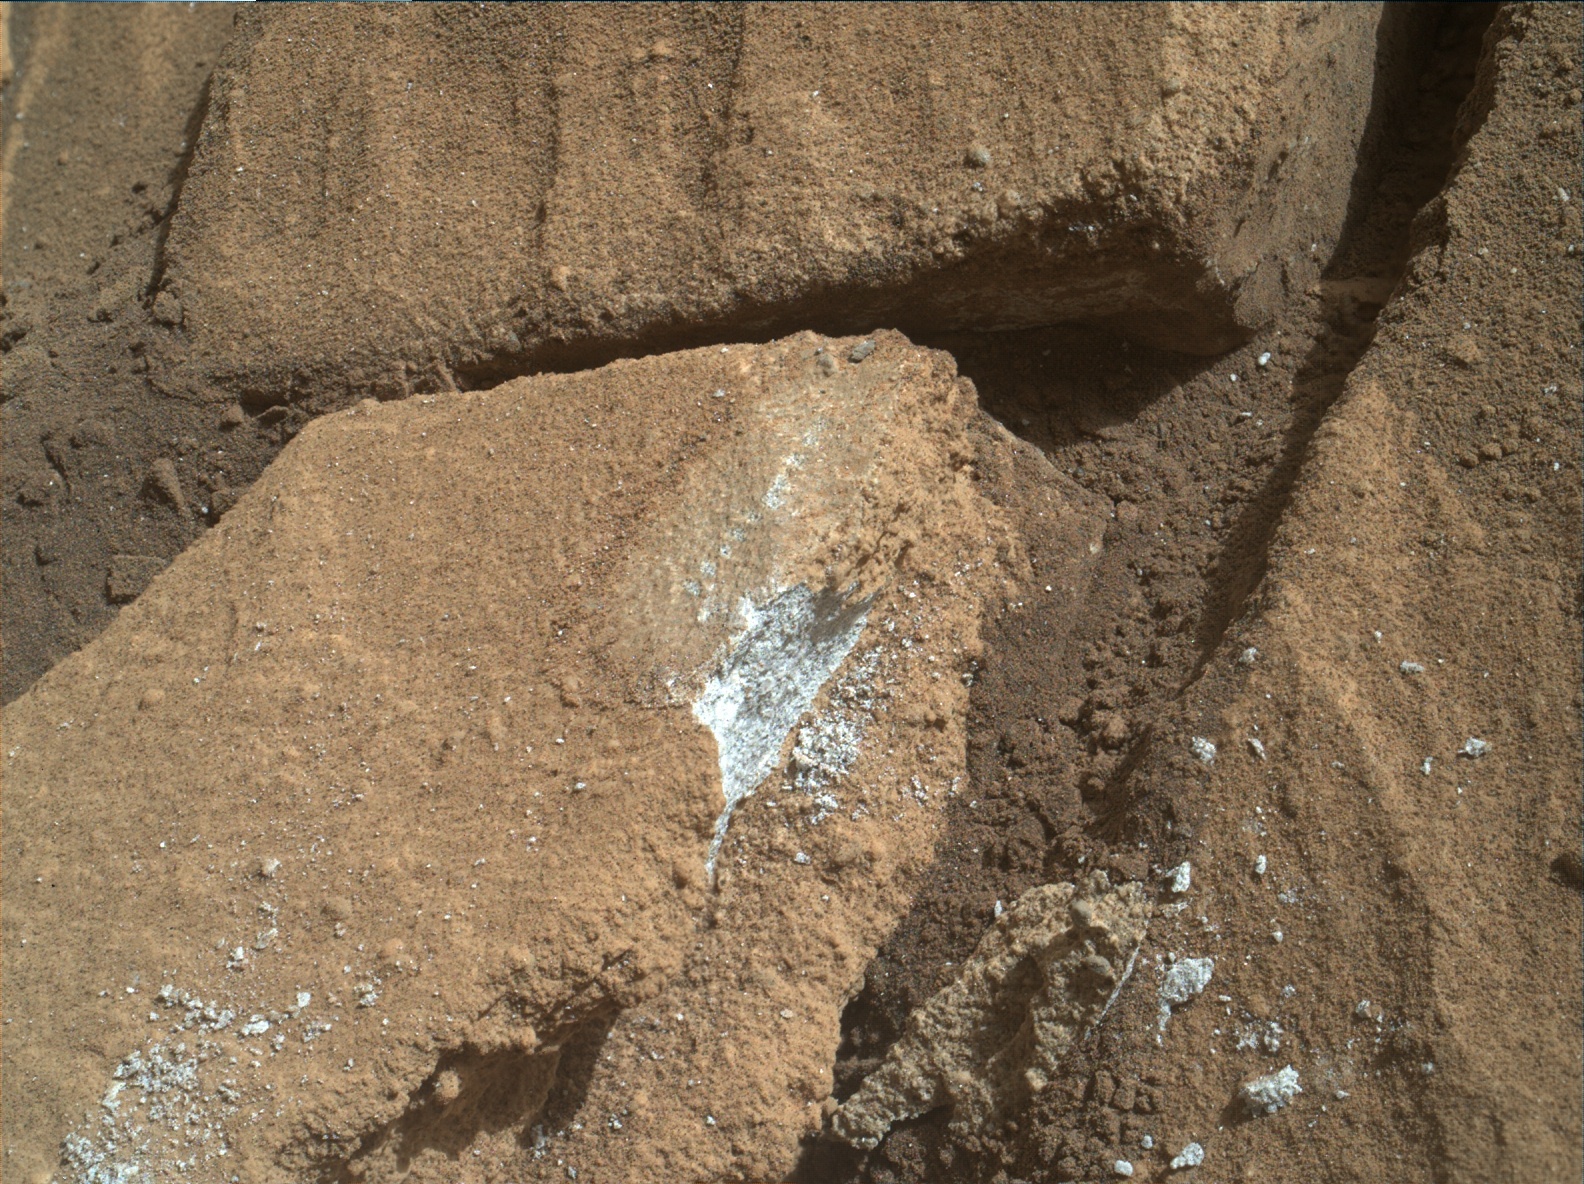 Nasa's Mars rover Curiosity acquired this image using its Mars Hand Lens Imager (MAHLI) on Sol 1326